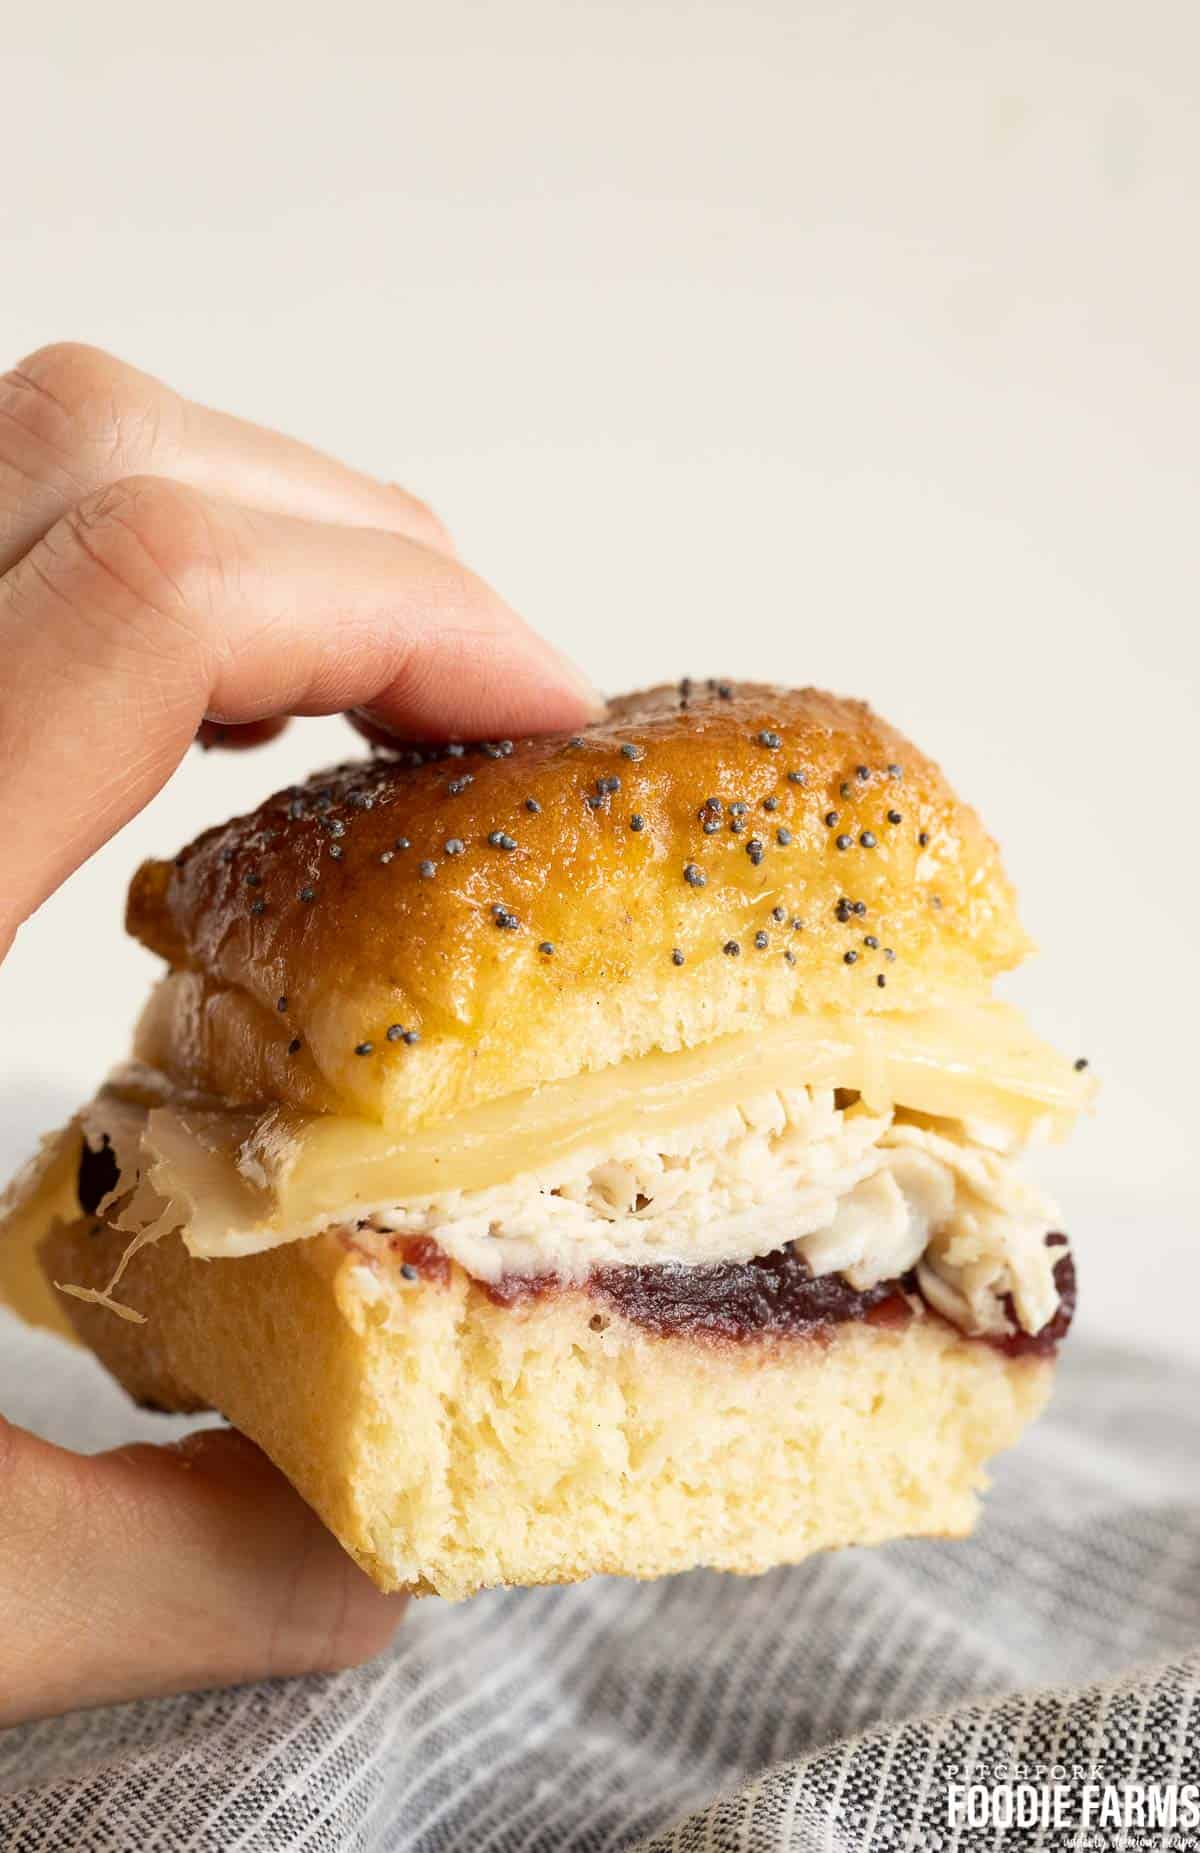 A hand holding a baked slider on a Hawaiian roll with deli turkey, cheese, and cranberry sauce.